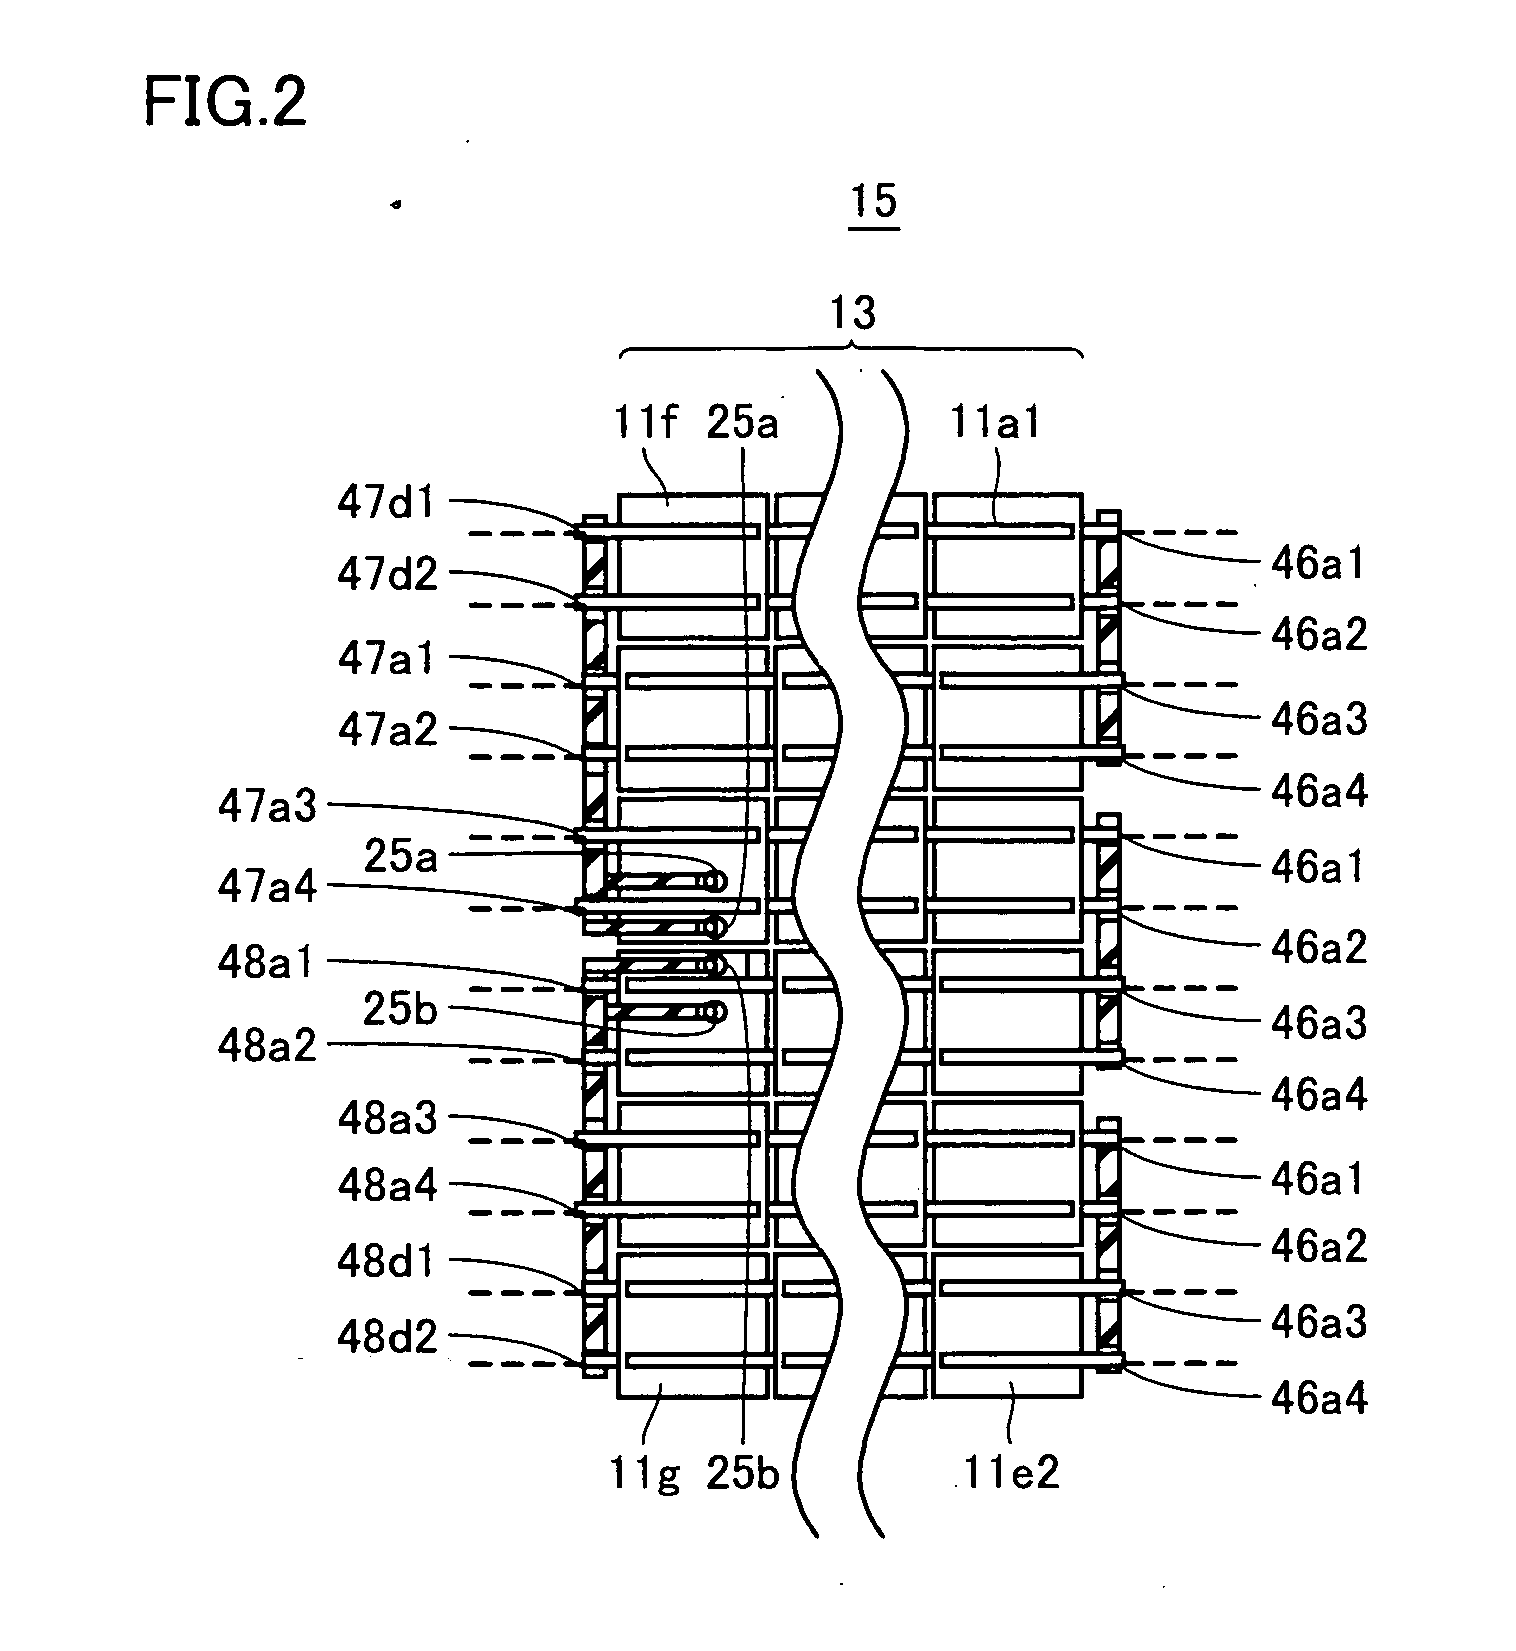 Integrated Wiring Member for Solar Cell Module, Solar Cell Module Using the Same, and Manufacturing Methods Thereof